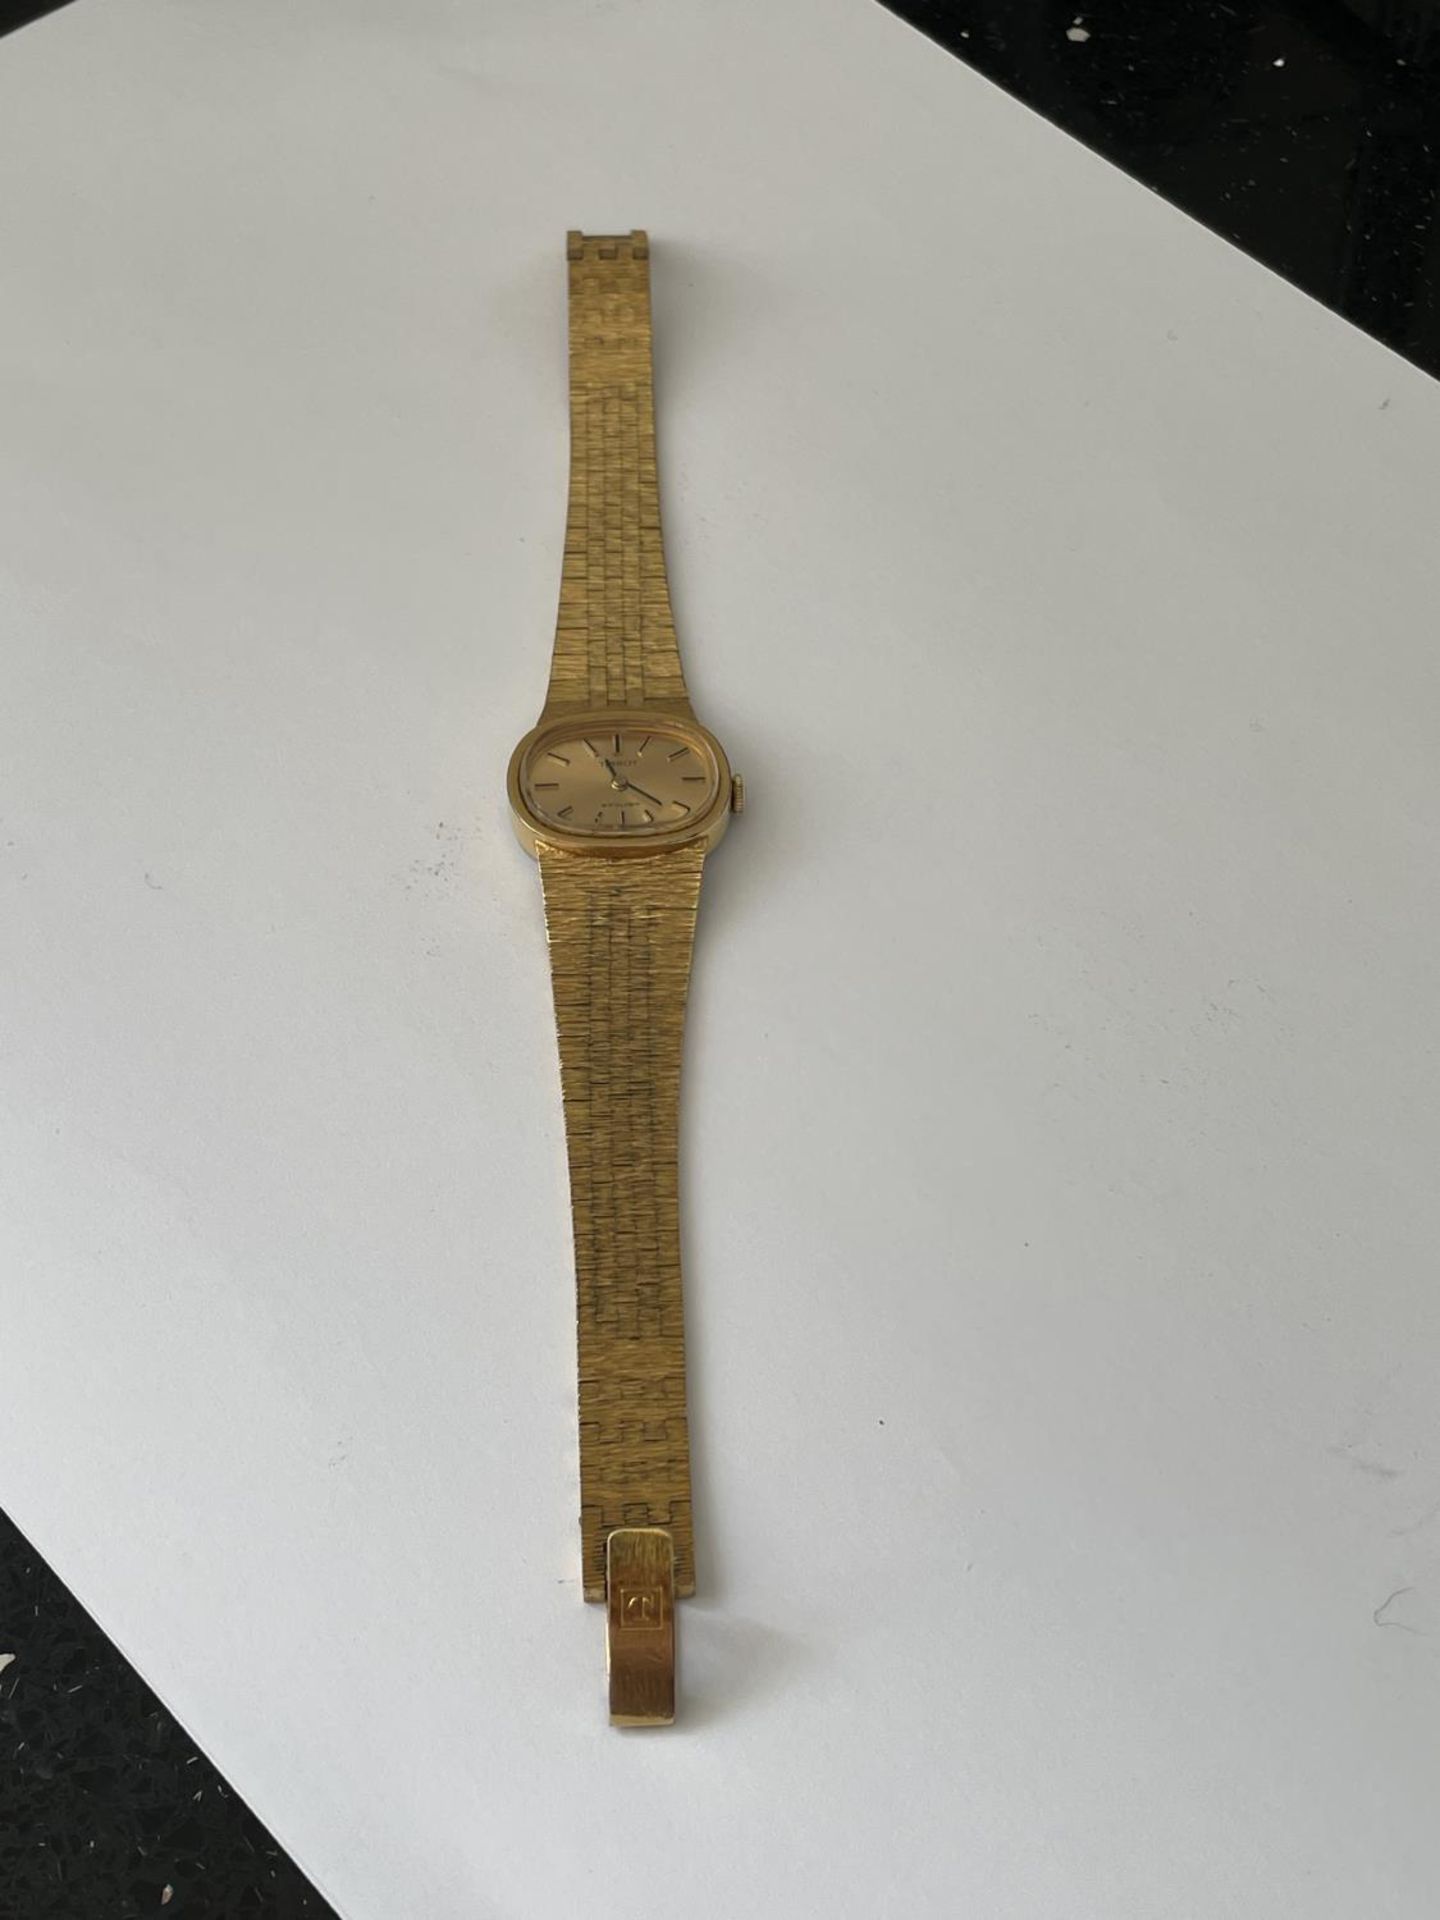 A TISSOT WRISTWATCH WITH YELLOW METAL STRAP SEEN WORKING BUT NO WARRANTY